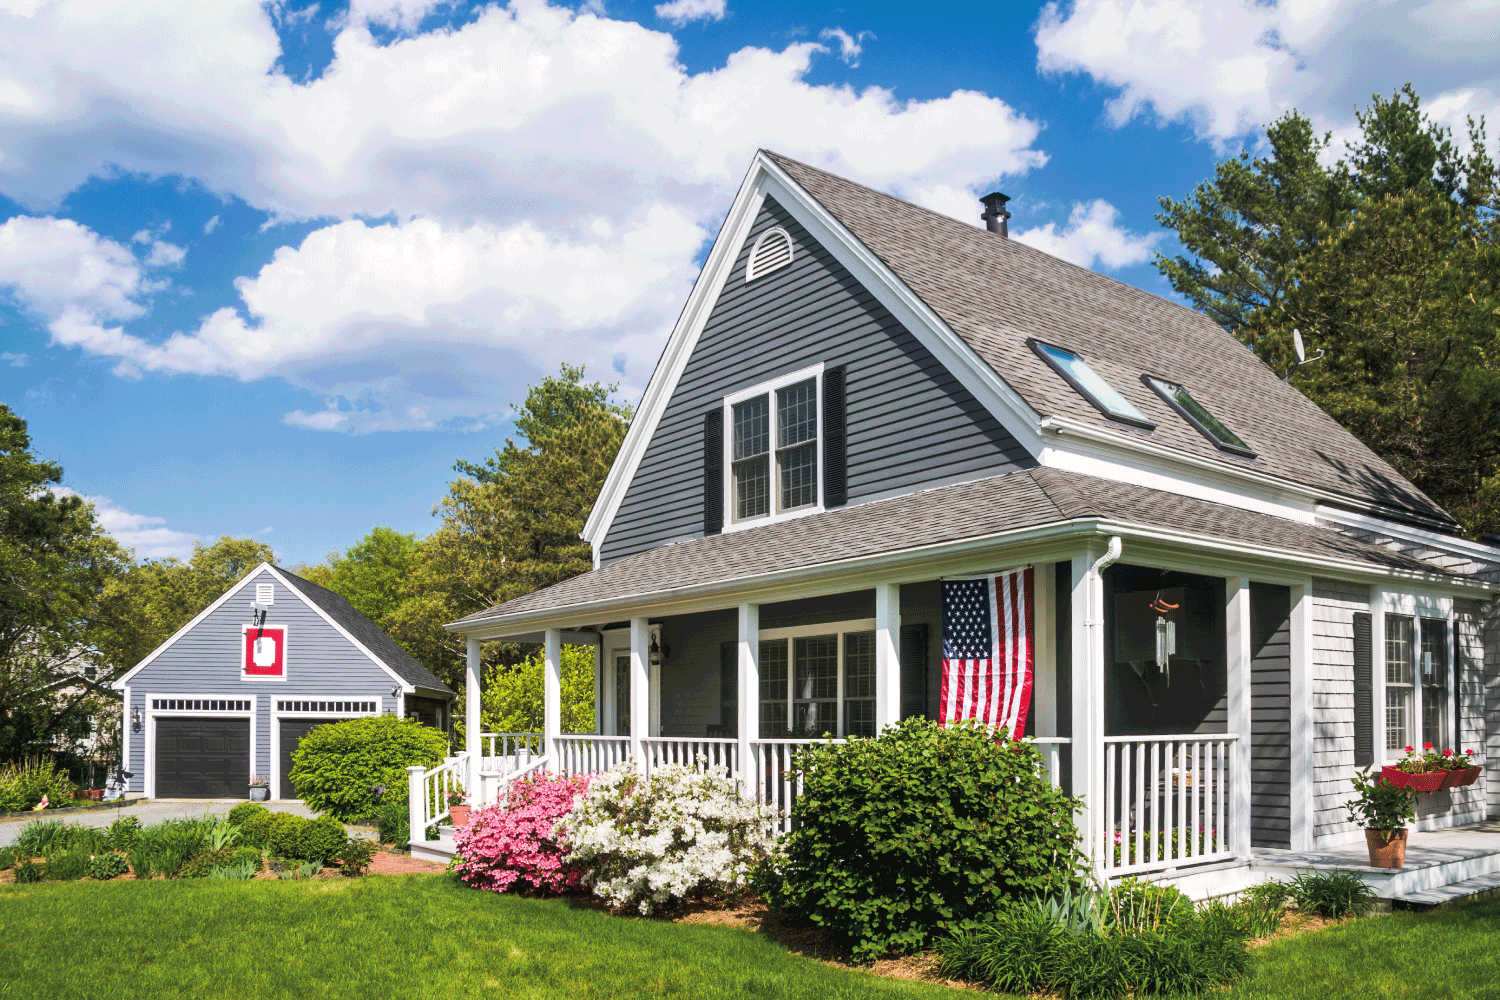 cape cod style house with American flag on the front porch